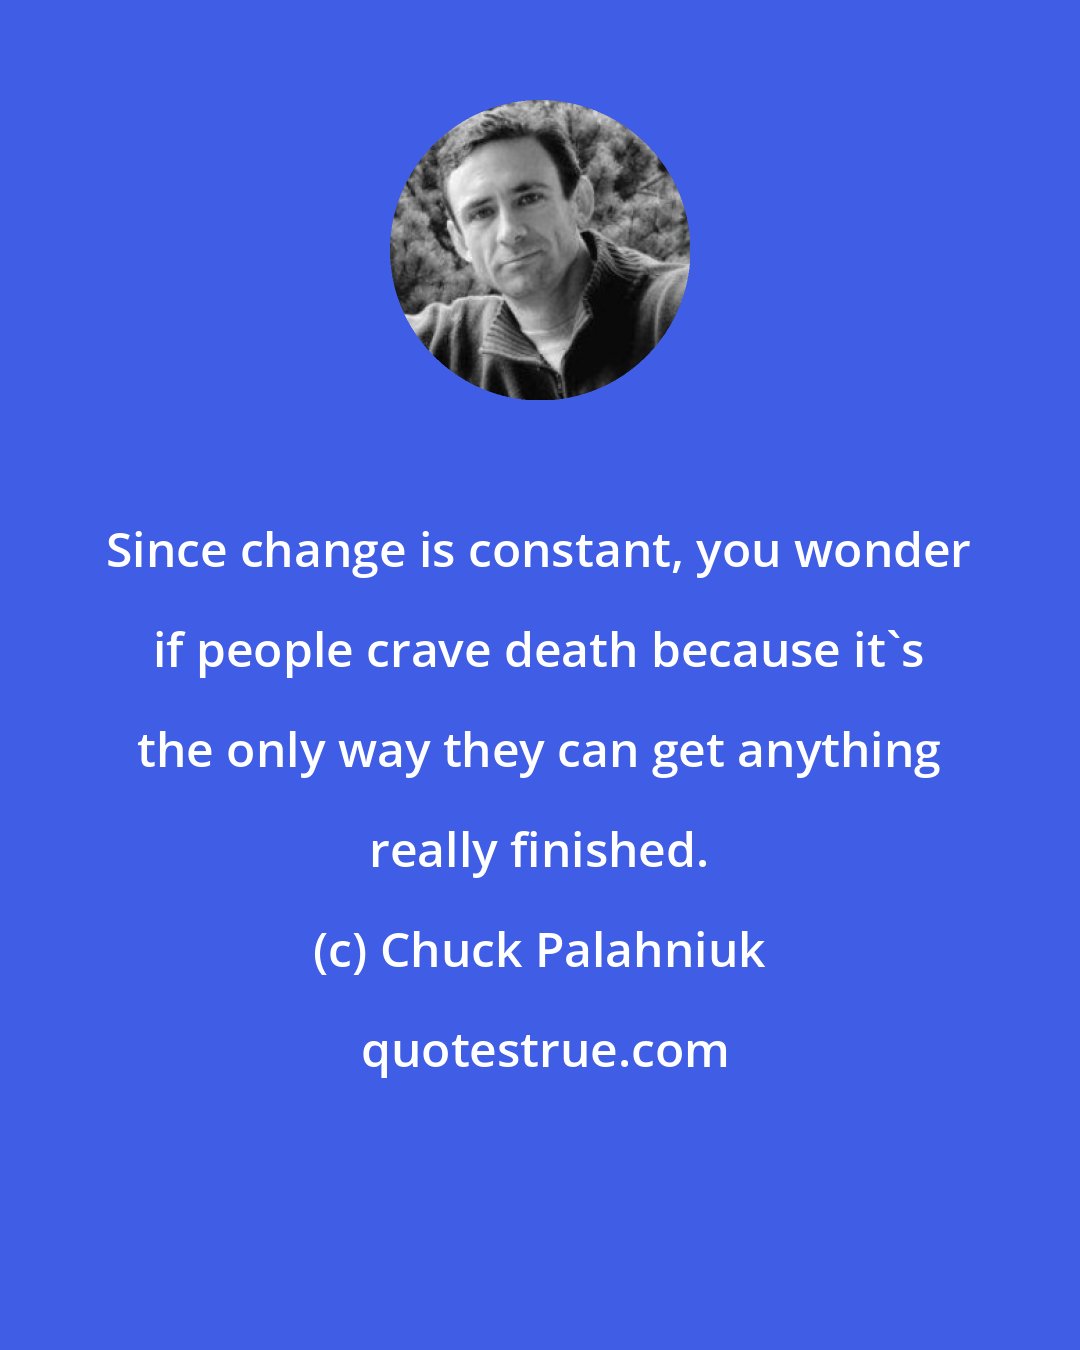 Chuck Palahniuk: Since change is constant, you wonder if people crave death because it's the only way they can get anything really finished.